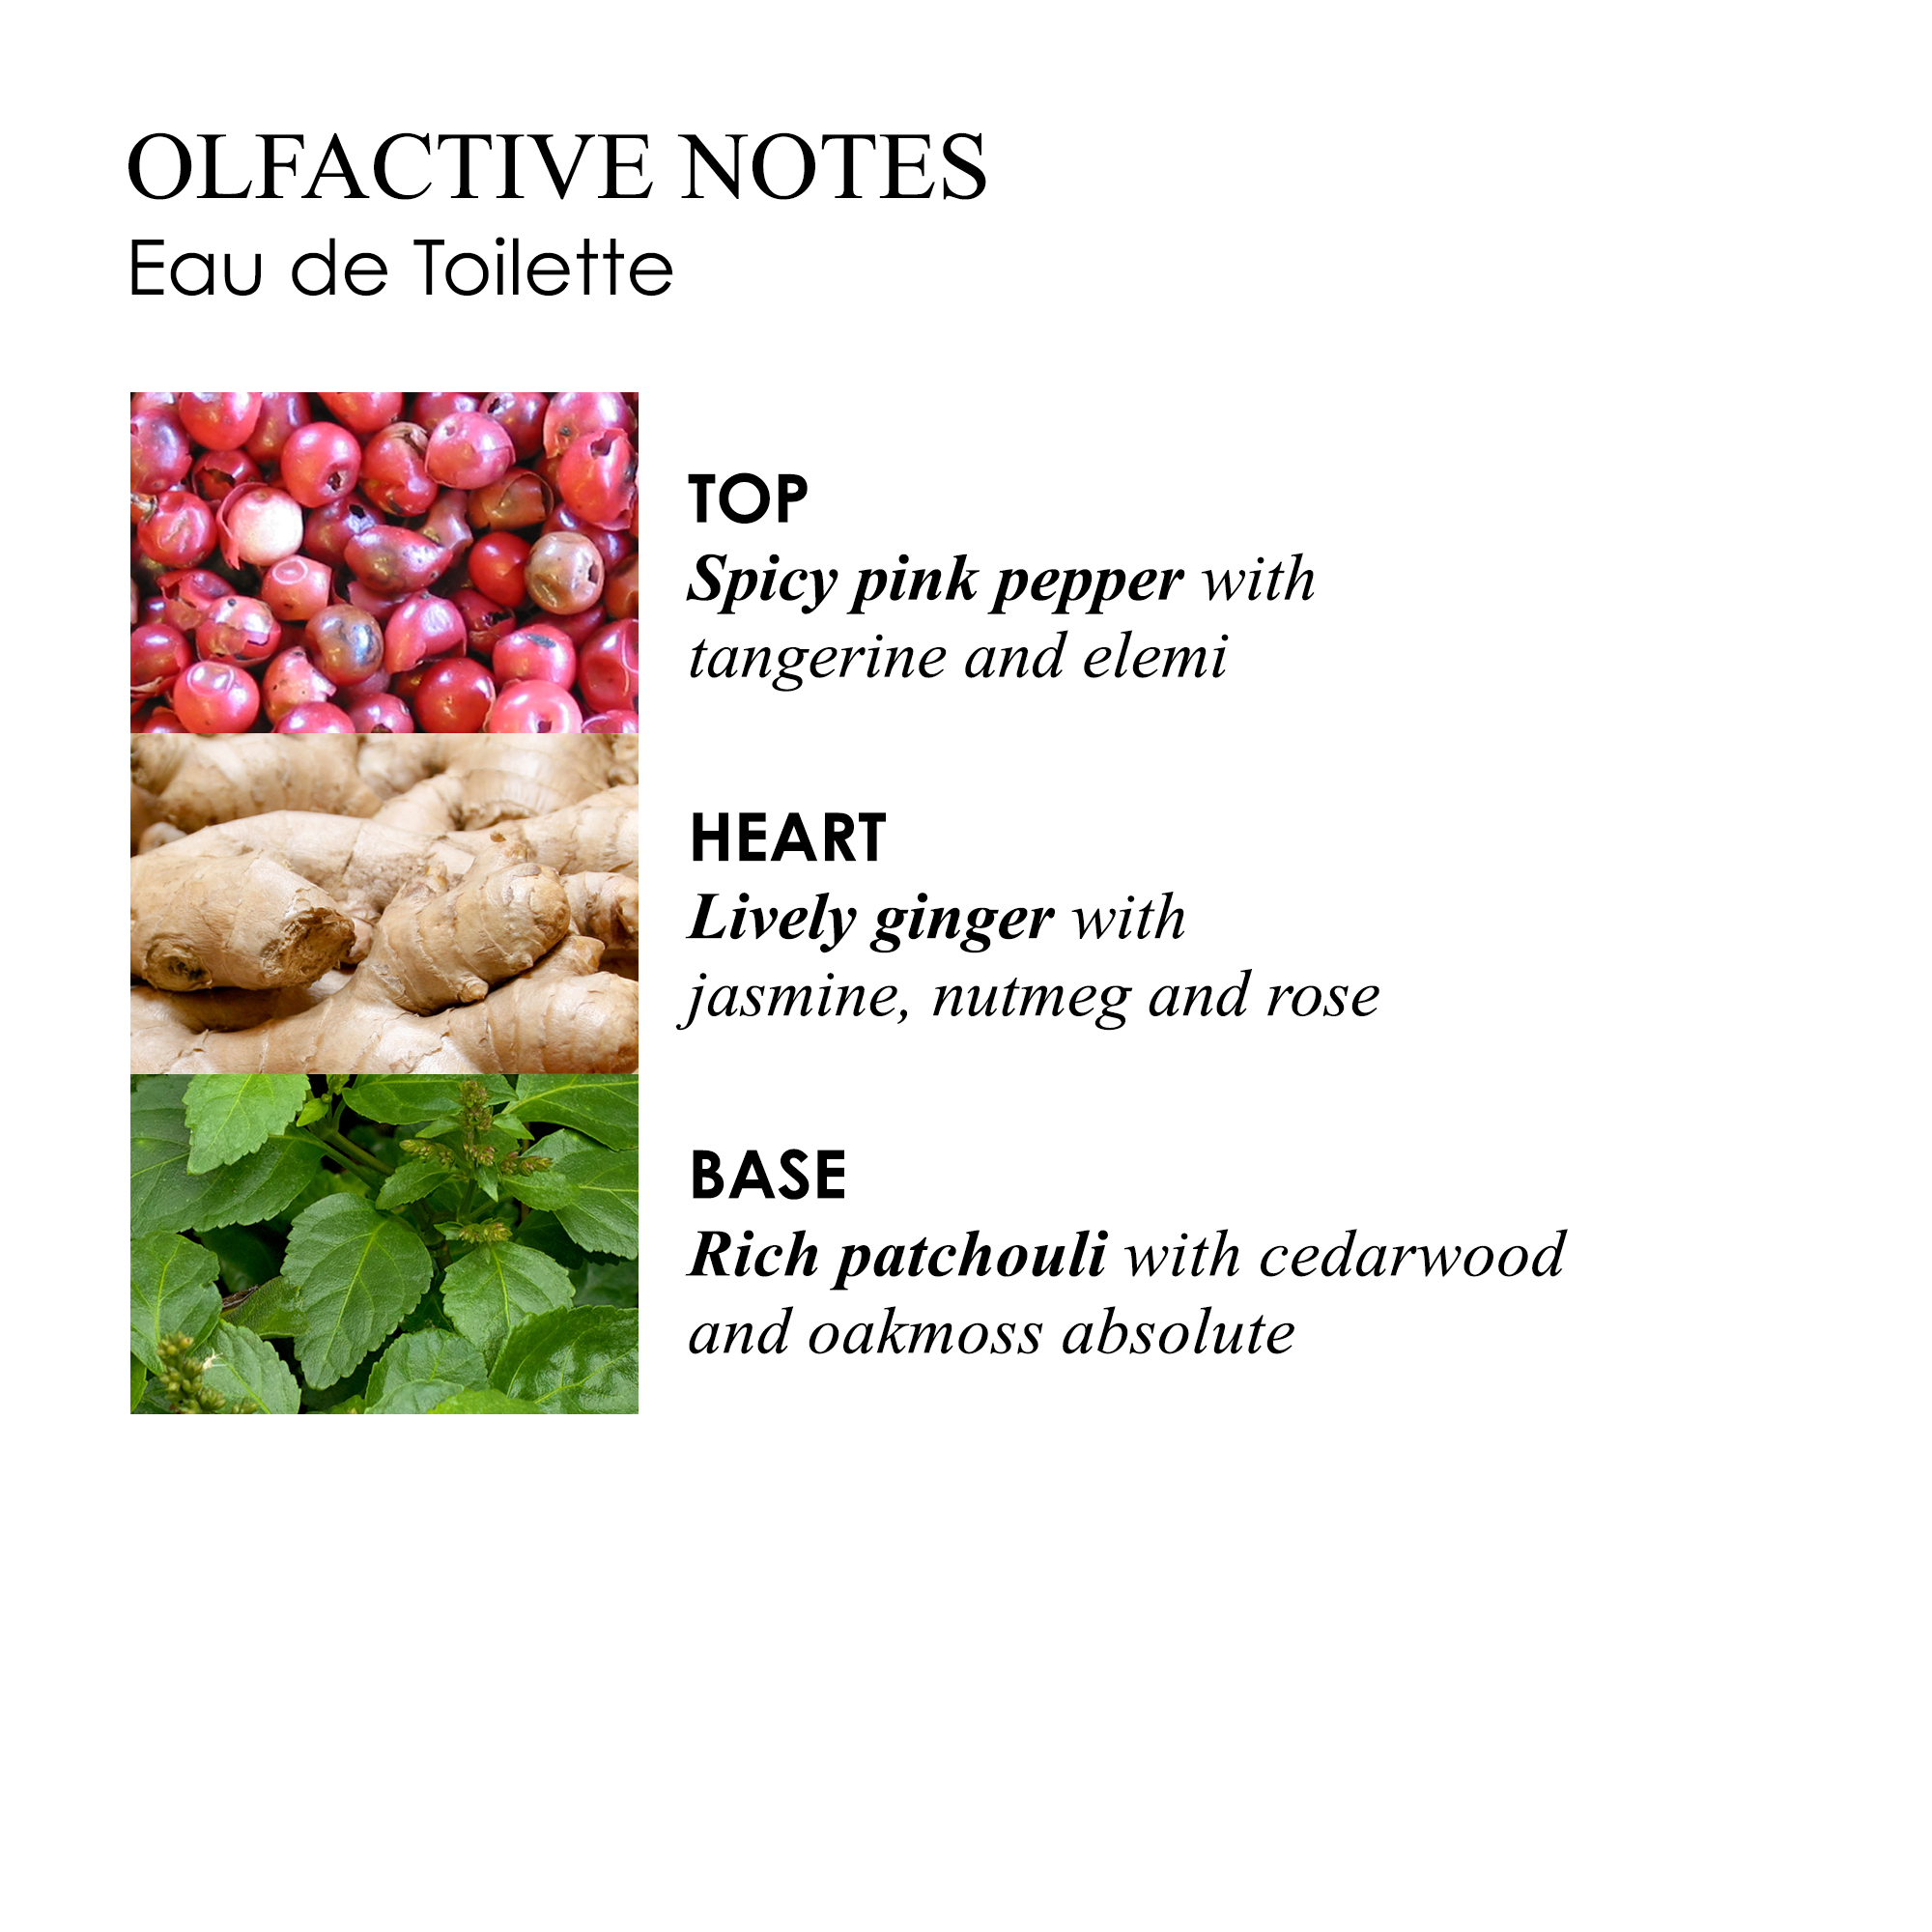 Olfactive Notes Eau de Toilette, Top spicy pink pepper with tangerine and elemi, Heart lively ginger with jasmine, nutmeg and rose, Base rich patchouli with cedarwood and oakmoss absolute.